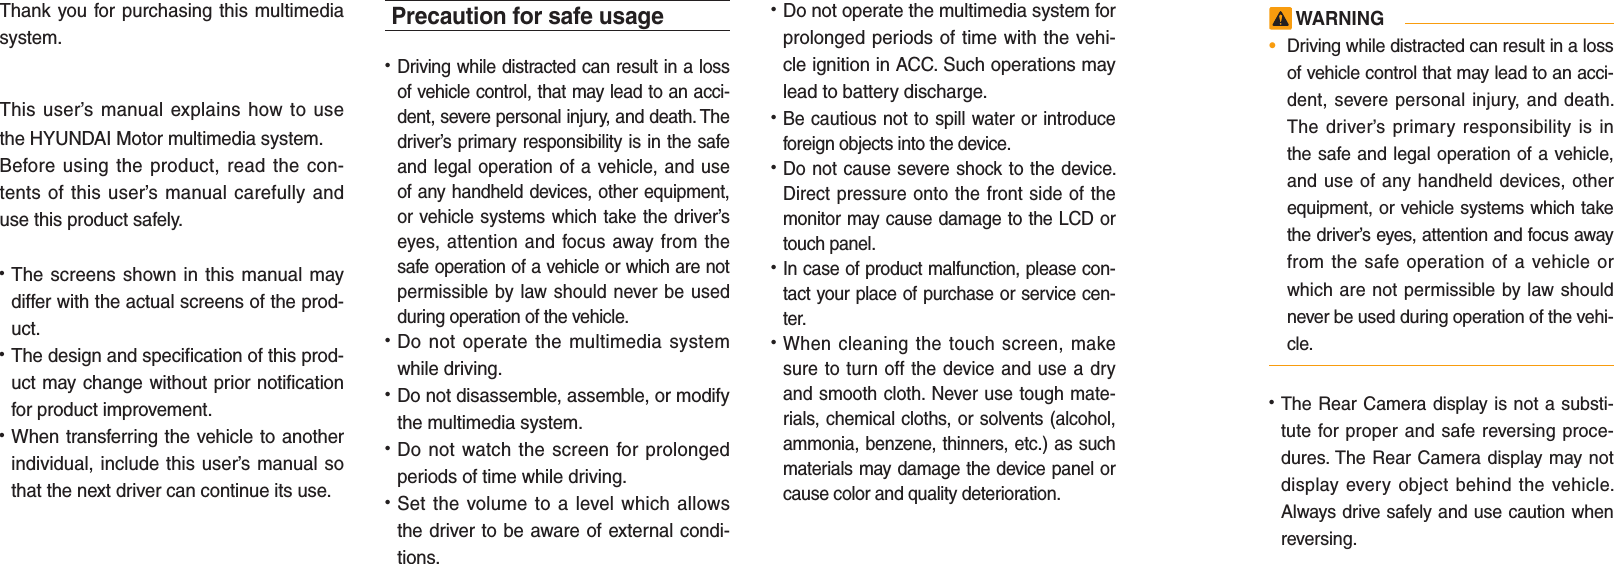 Thank you for purchasing this multimedia system.This user’s manual explains how to use the HYUNDAI Motor multimedia system.Before using the product, read the con-tents of this user’s manual carefully and use this product safely.• The screens shown in this manual may differ with the actual screens of the prod-uct.• The design and specification of this prod-uct may change without prior notification for product improvement.• When transferring the vehicle to another individual, include this user’s manual so that the next driver can continue its use.Precaution for safe usage• Driving while distracted can result in a loss of vehicle control, that may lead to an acci-dent, severe personal injury, and death. The driver’s primary responsibility is in the safe and legal operation of a vehicle, and use of any handheld devices, other equipment, or vehicle systems which take the driver’s eyes, attention and focus away from the safe operation of a vehicle or which are not permissible by law should never be used during operation of the vehicle.• Do not operate the multimedia system while driving.• Do not disassemble, assemble, or modify the multimedia system.• Do not watch the screen for prolonged periods of time while driving.• Set the volume to a level which allows the driver to be aware of external condi-tions.• Do not operate the multimedia system for prolonged periods of time with the vehi-cle ignition in ACC. Such operations may lead to battery discharge.• Be cautious not to spill water or introduce foreign objects into the device.• Do not cause severe shock to the device. Direct pressure onto the front side of the monitor may cause damage to the LCD or touch panel.• In case of product malfunction, please con-tact your place of purchase or service cen-ter.• When cleaning the touch screen, make sure to turn off the device and use a dry and smooth cloth. Never use tough mate-rials, chemical cloths, or solvents (alcohol, ammonia, benzene, thinners, etc.) as such materials may damage the device panel or cause color and quality deterioration. WARNING•  Driving while distracted can result in a loss of vehicle control that may lead to an acci-dent, severe personal injury, and death. The driver’s primary responsibility is in the safe and legal operation of a vehicle, and use of any handheld devices, other equipment, or vehicle systems which take the driver’s eyes, attention and focus away from the safe operation of a vehicle or which are not permissible by law should never be used during operation of the vehi-cle.• The Rear Camera display is not a substi-tute for proper and safe reversing proce-dures. The Rear Camera display may not display every object behind the vehicle. Always drive safely and use caution when reversing.